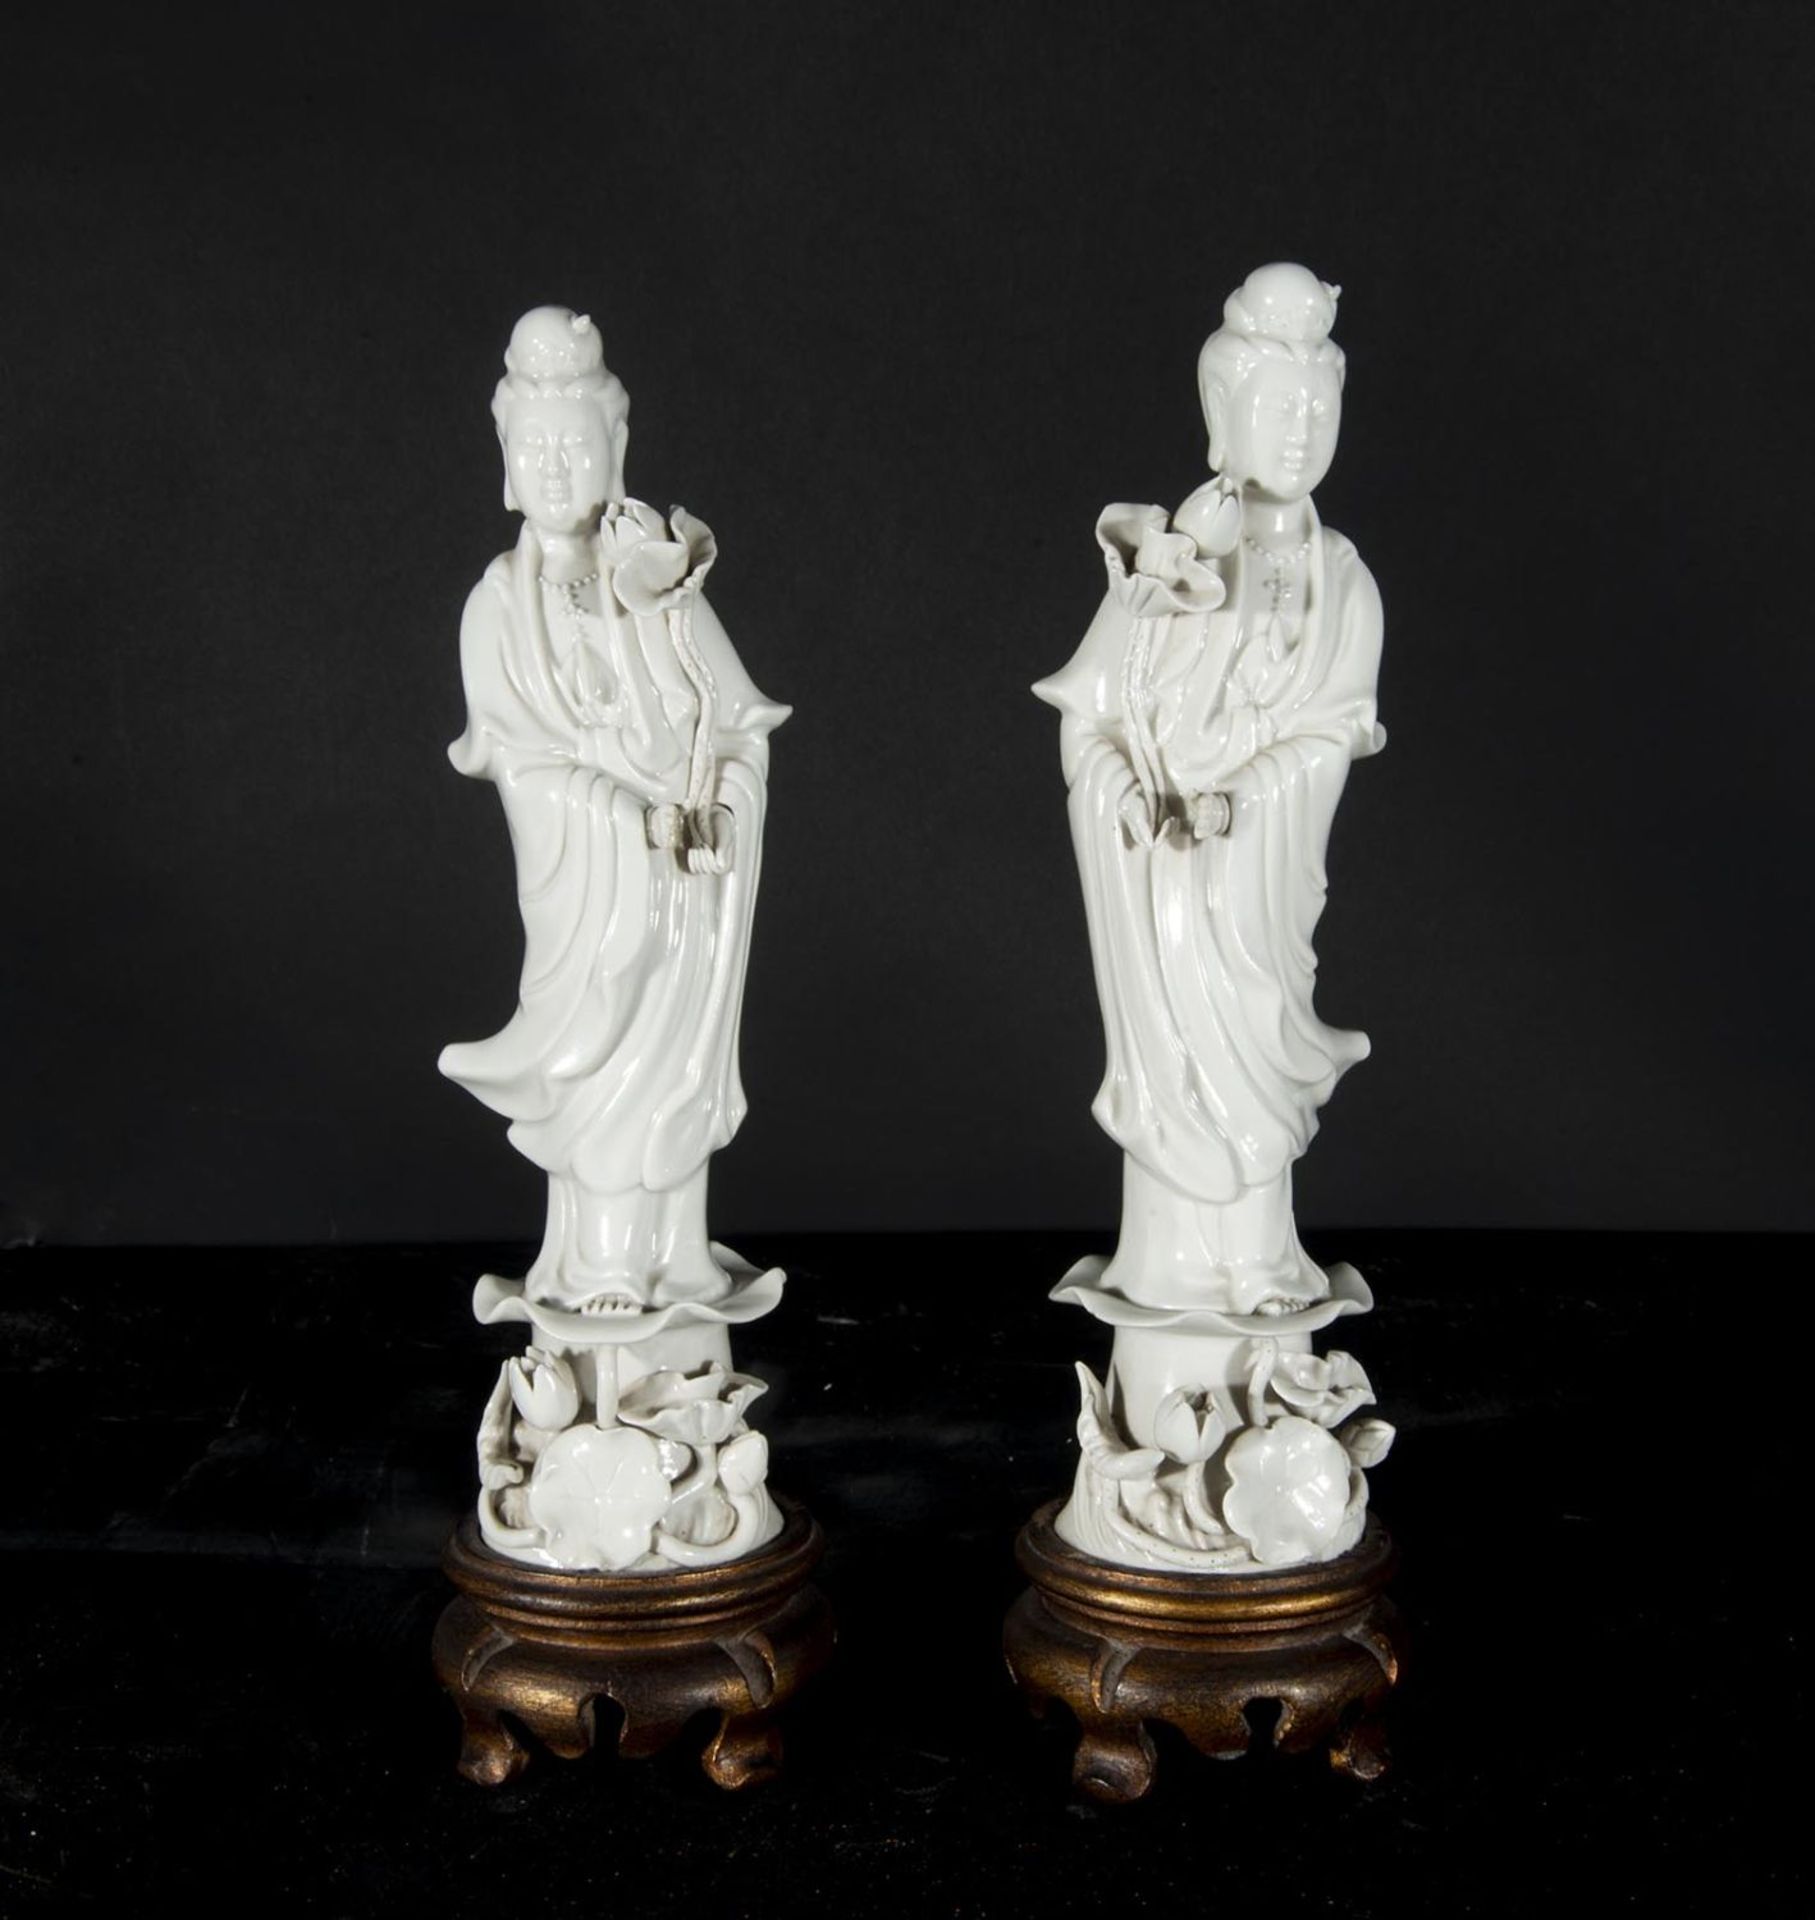 Pair of Guanyins in blanc de chine porcelain, 20th century Chinese school